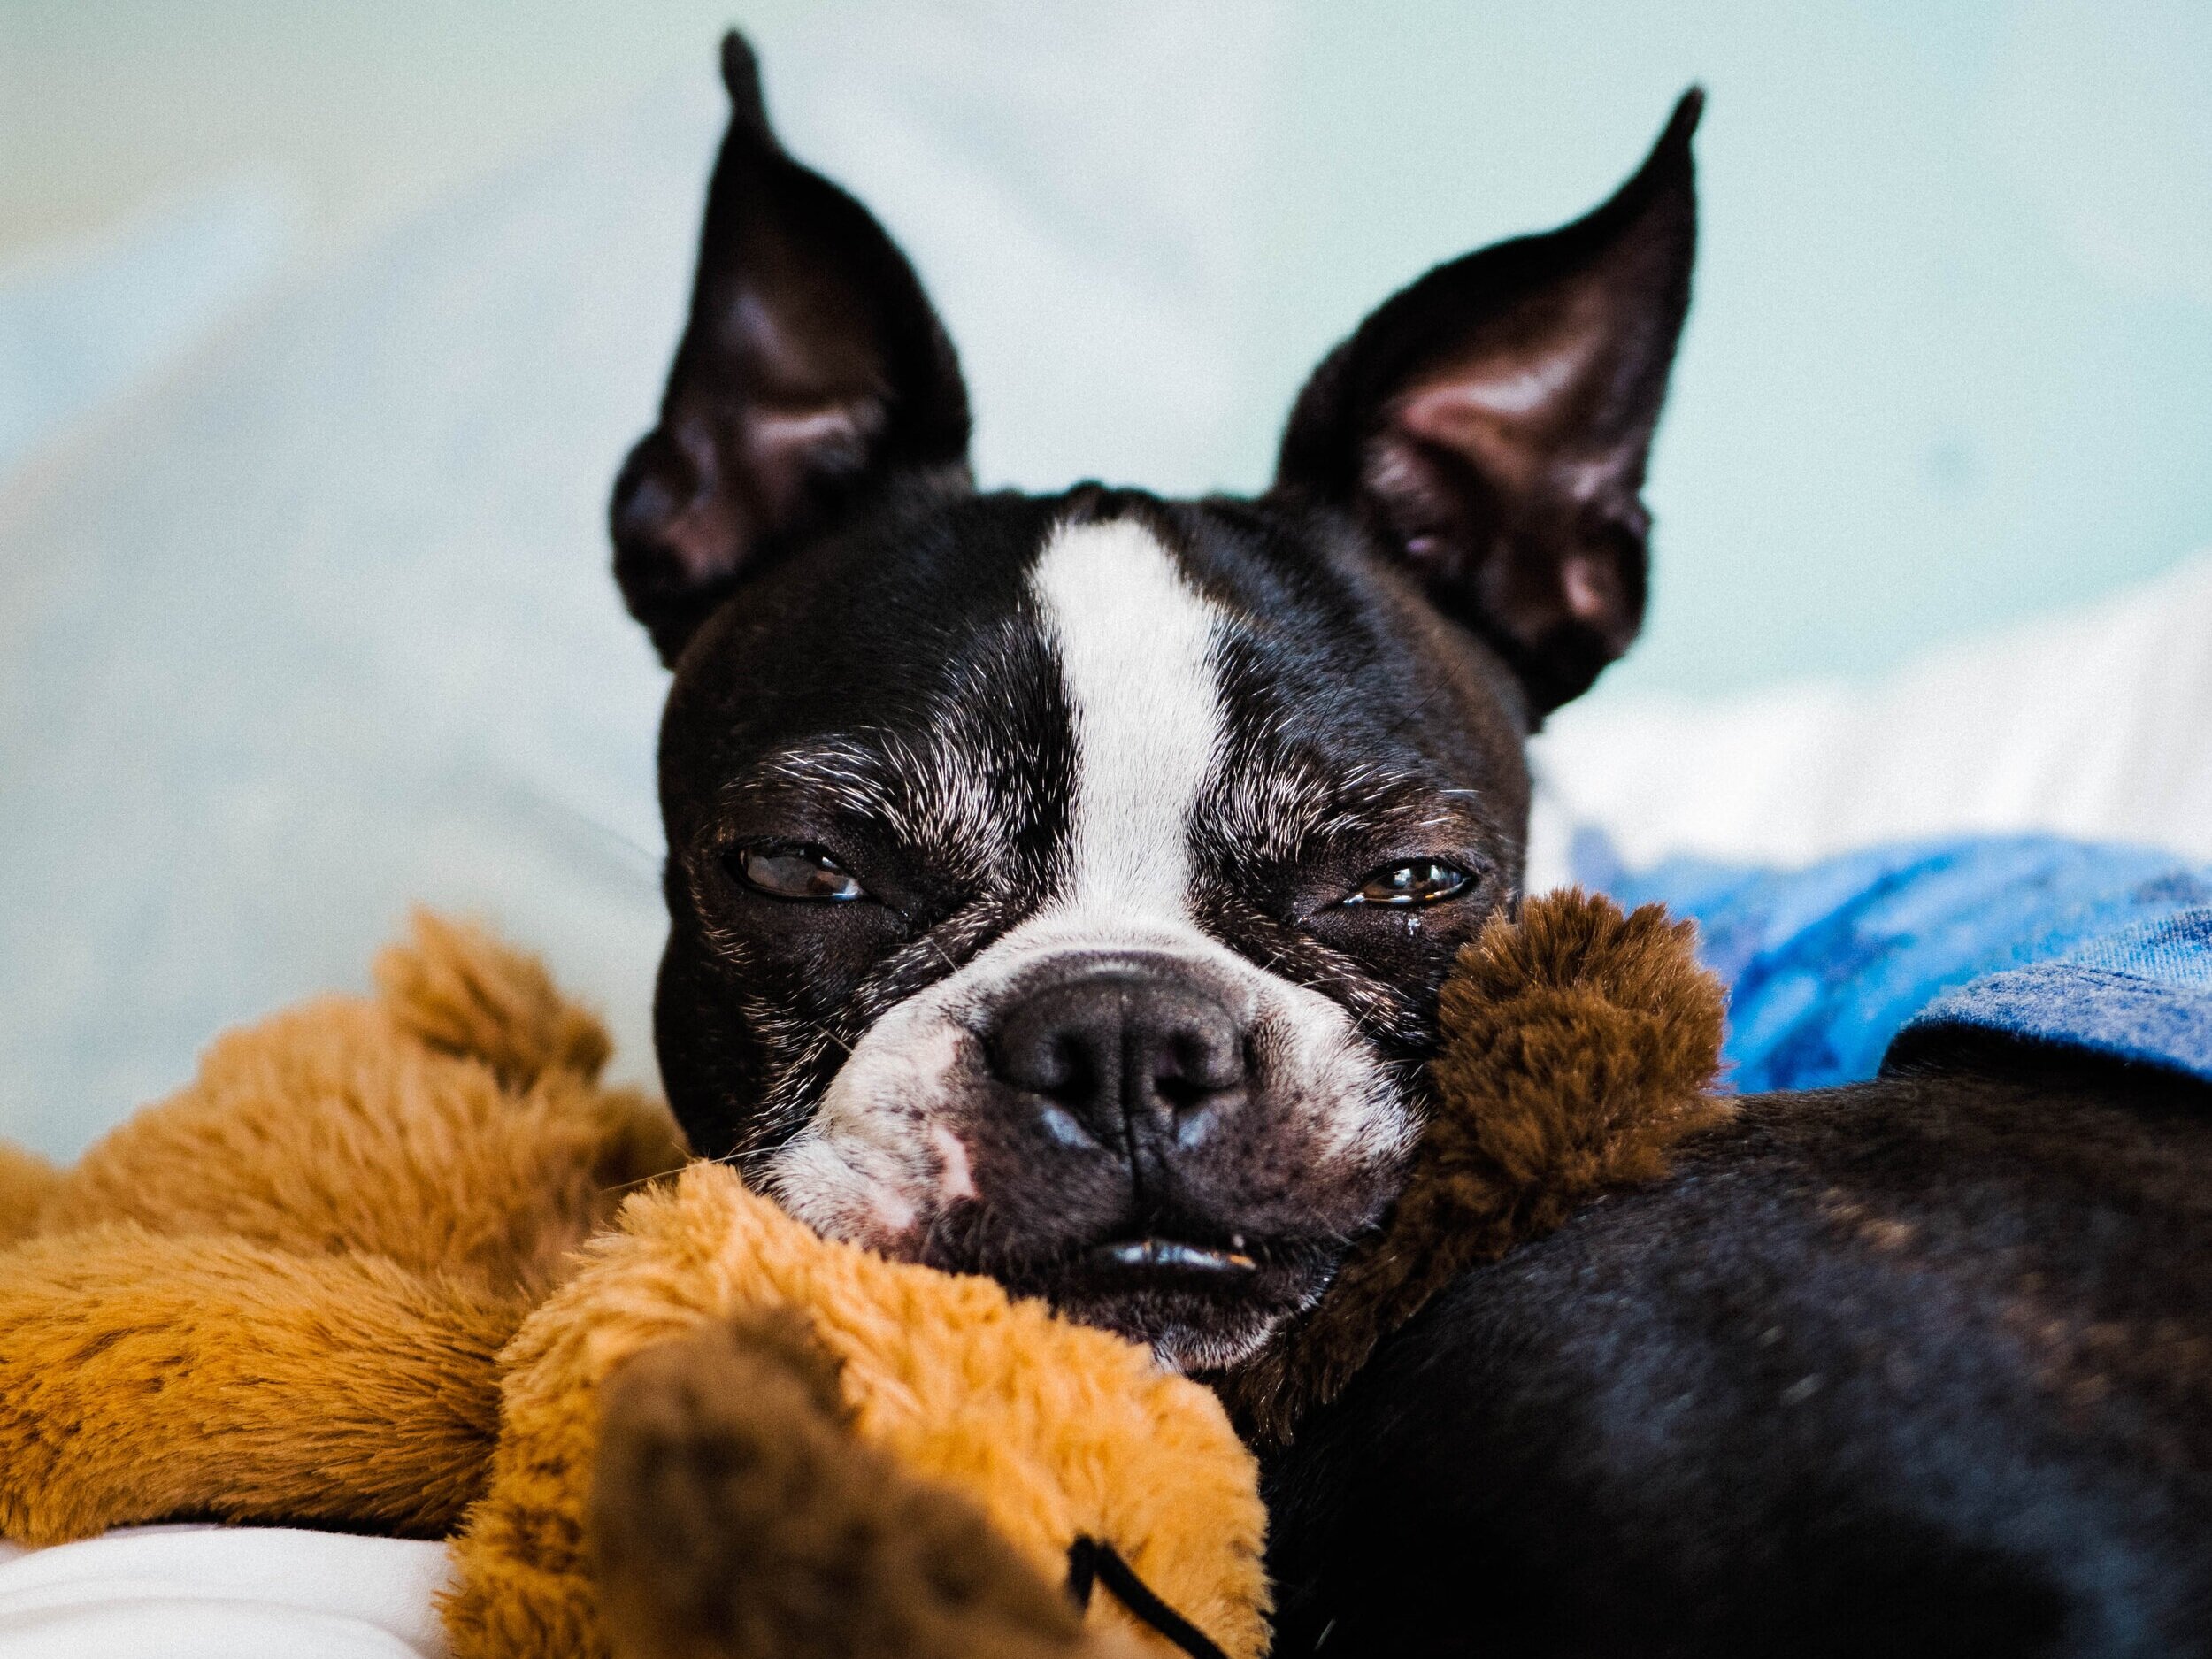 do boston terriers have breathing problems